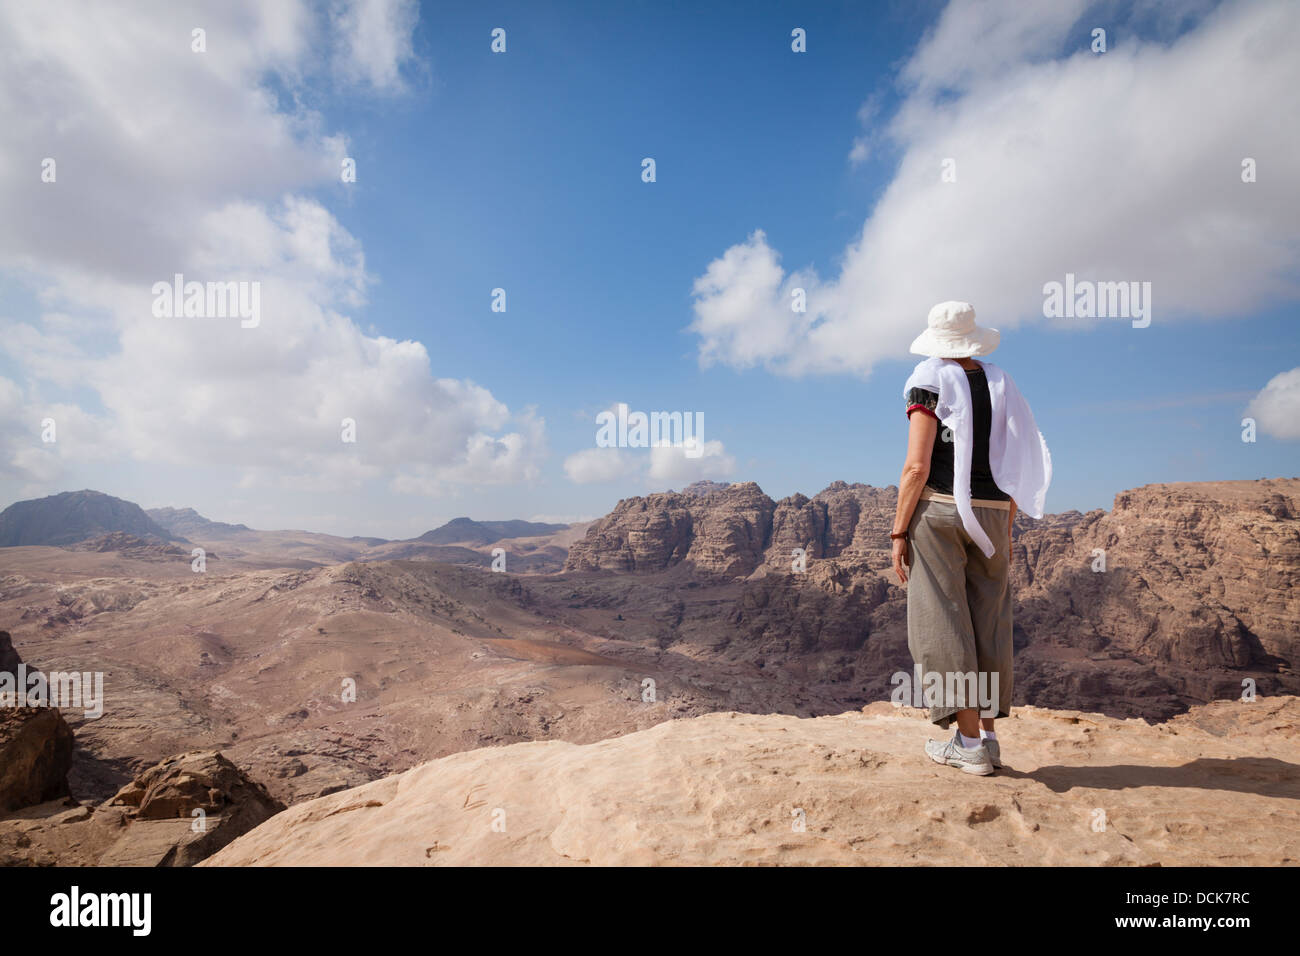 Woman is admiring a view of Jordanian desert while hiking in Petra. Stock Photo